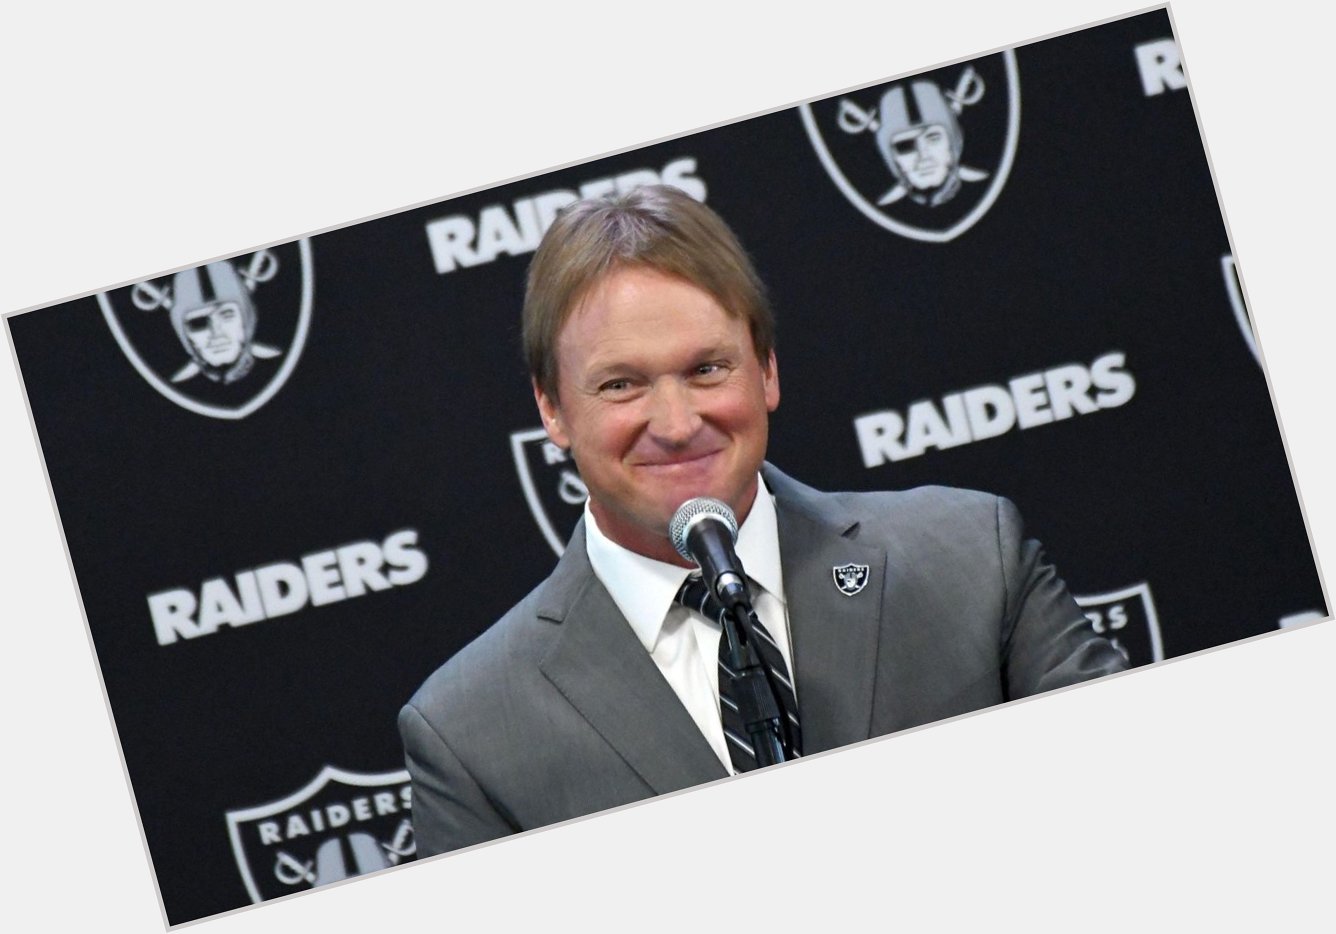 Happy birthday Jon Gruden, hope your birthday is as awesome as you are!   